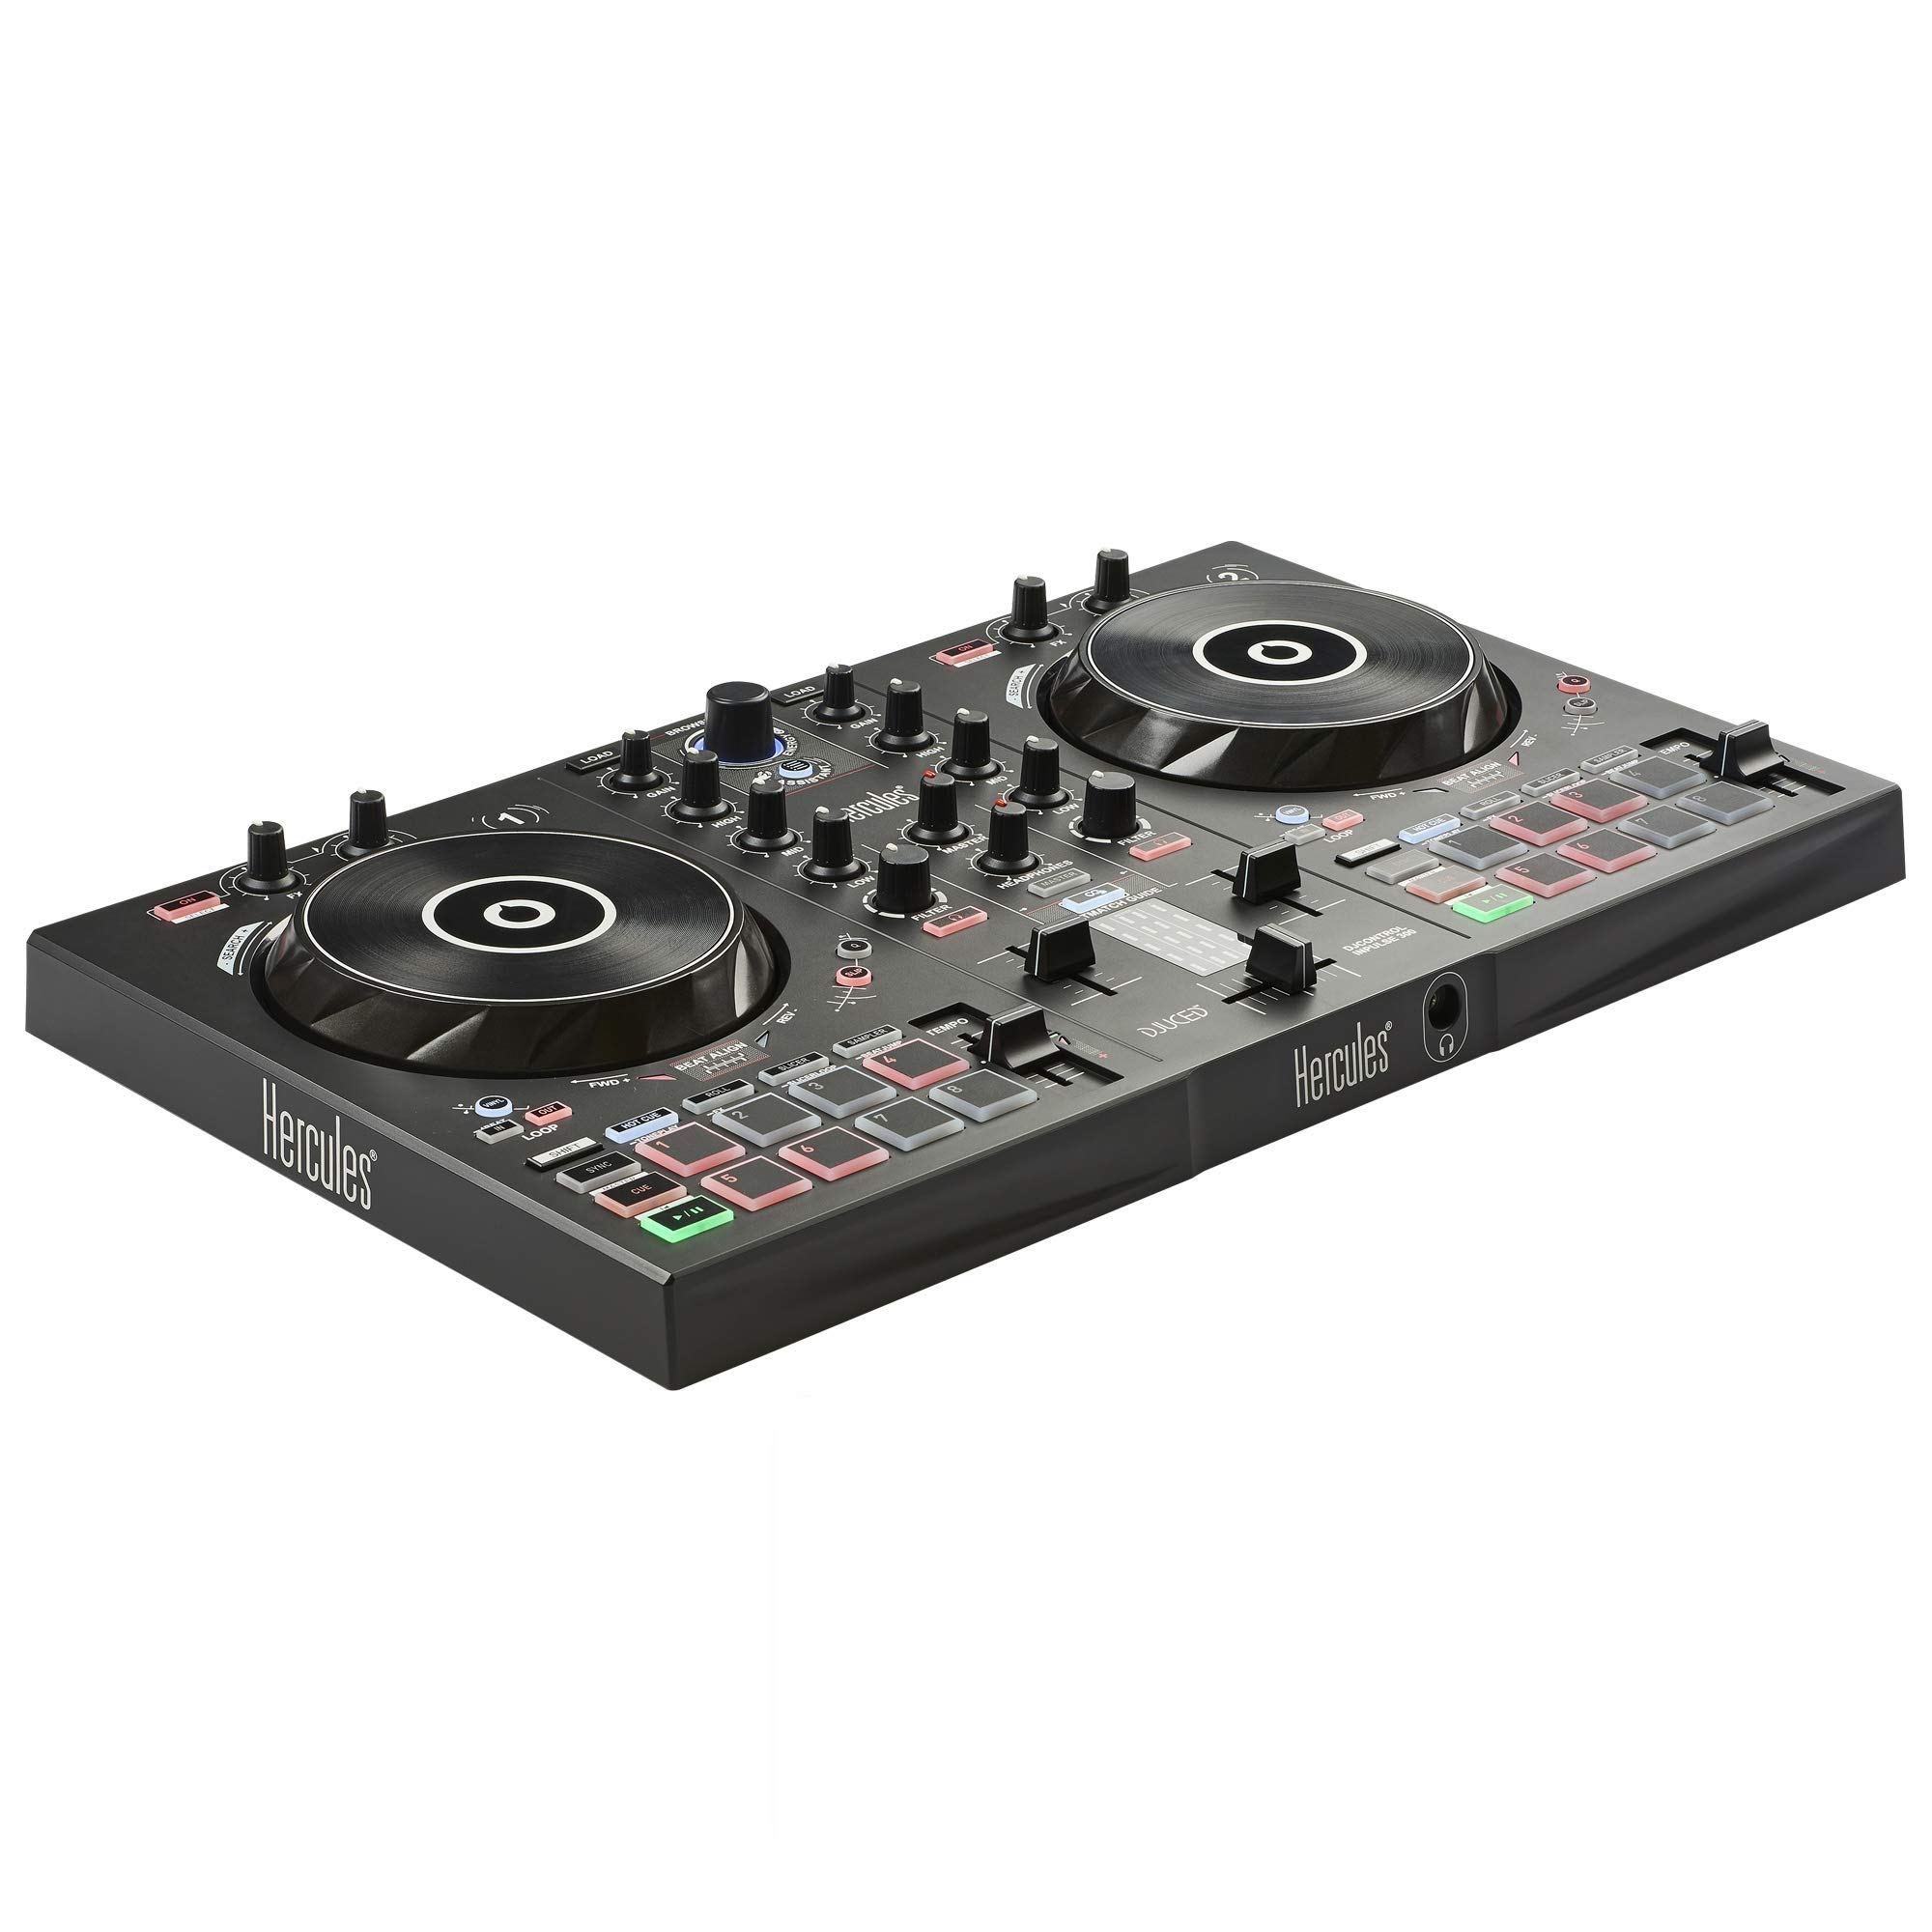 Hercules DJ DJ Control Inpulse 300 | 2 Channel USB Controller, with Beatmatch Guide, DJ Academy and Full DJ Software DJUCED Included